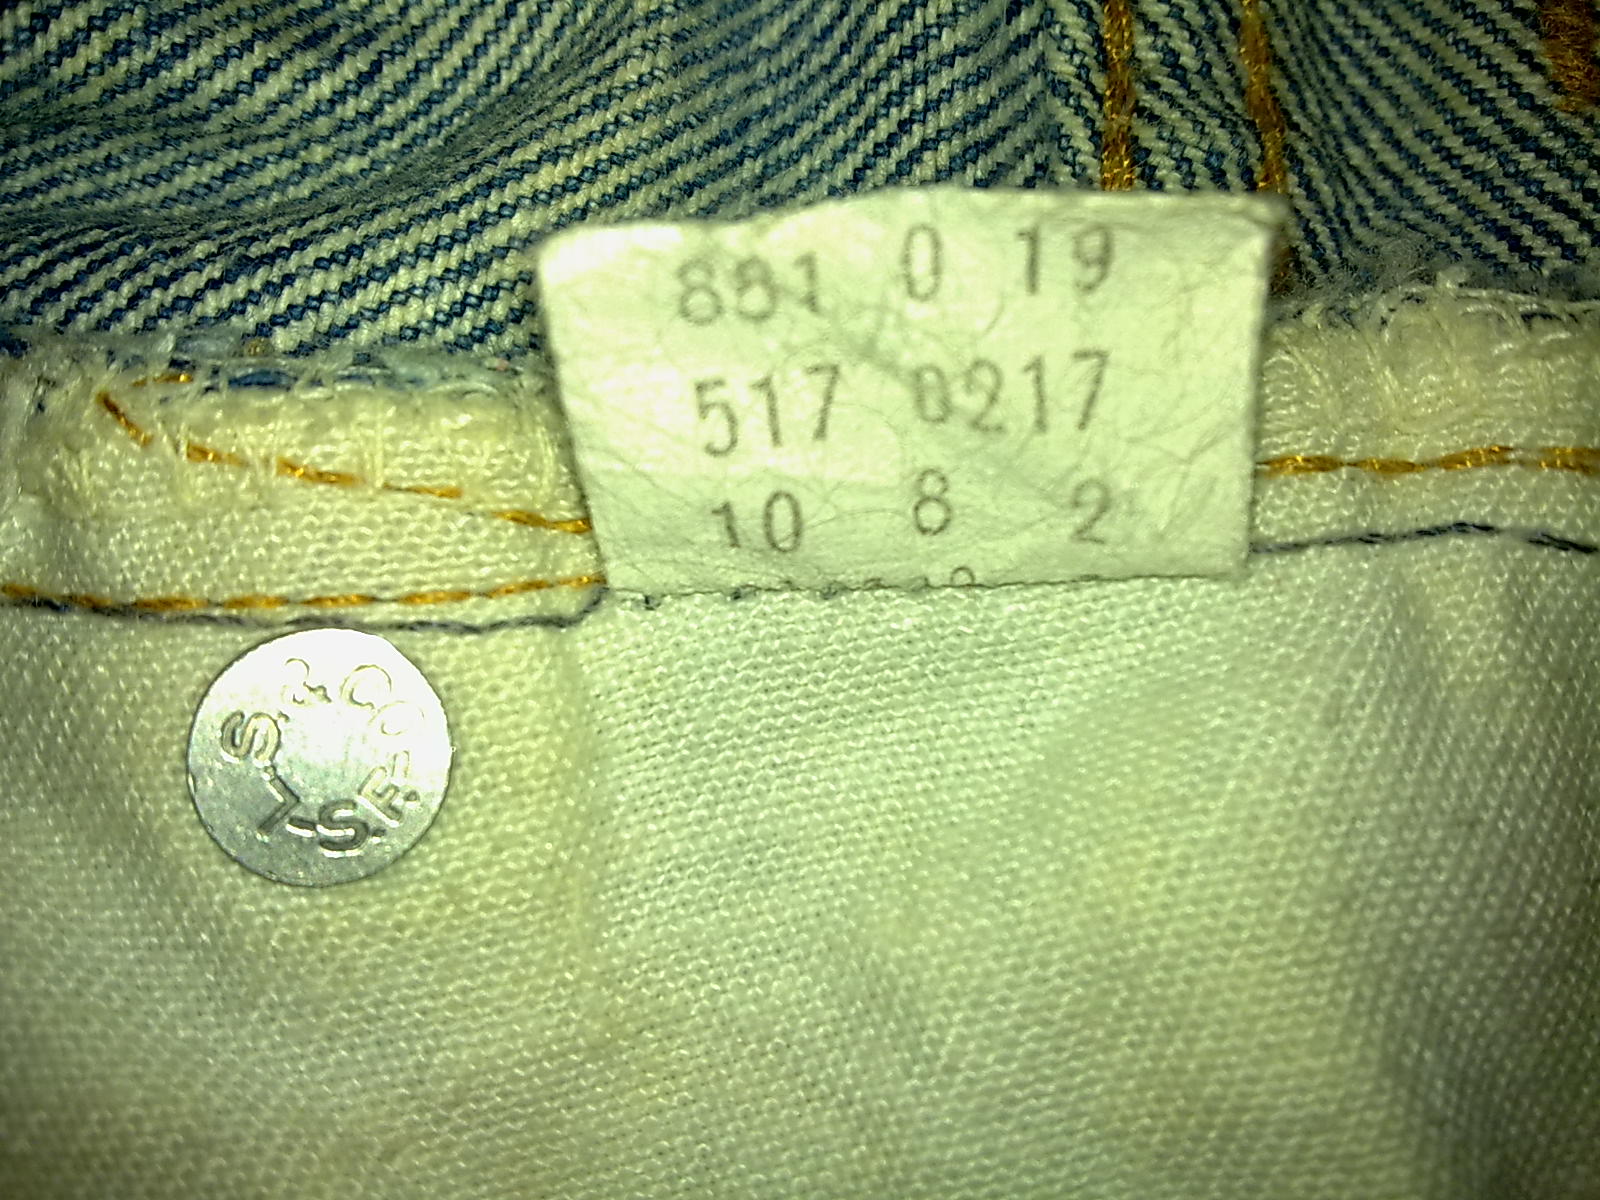 RED TOP BUNDLE: Levi's Jeans Vintage Red Tab With Single Number Button (2)